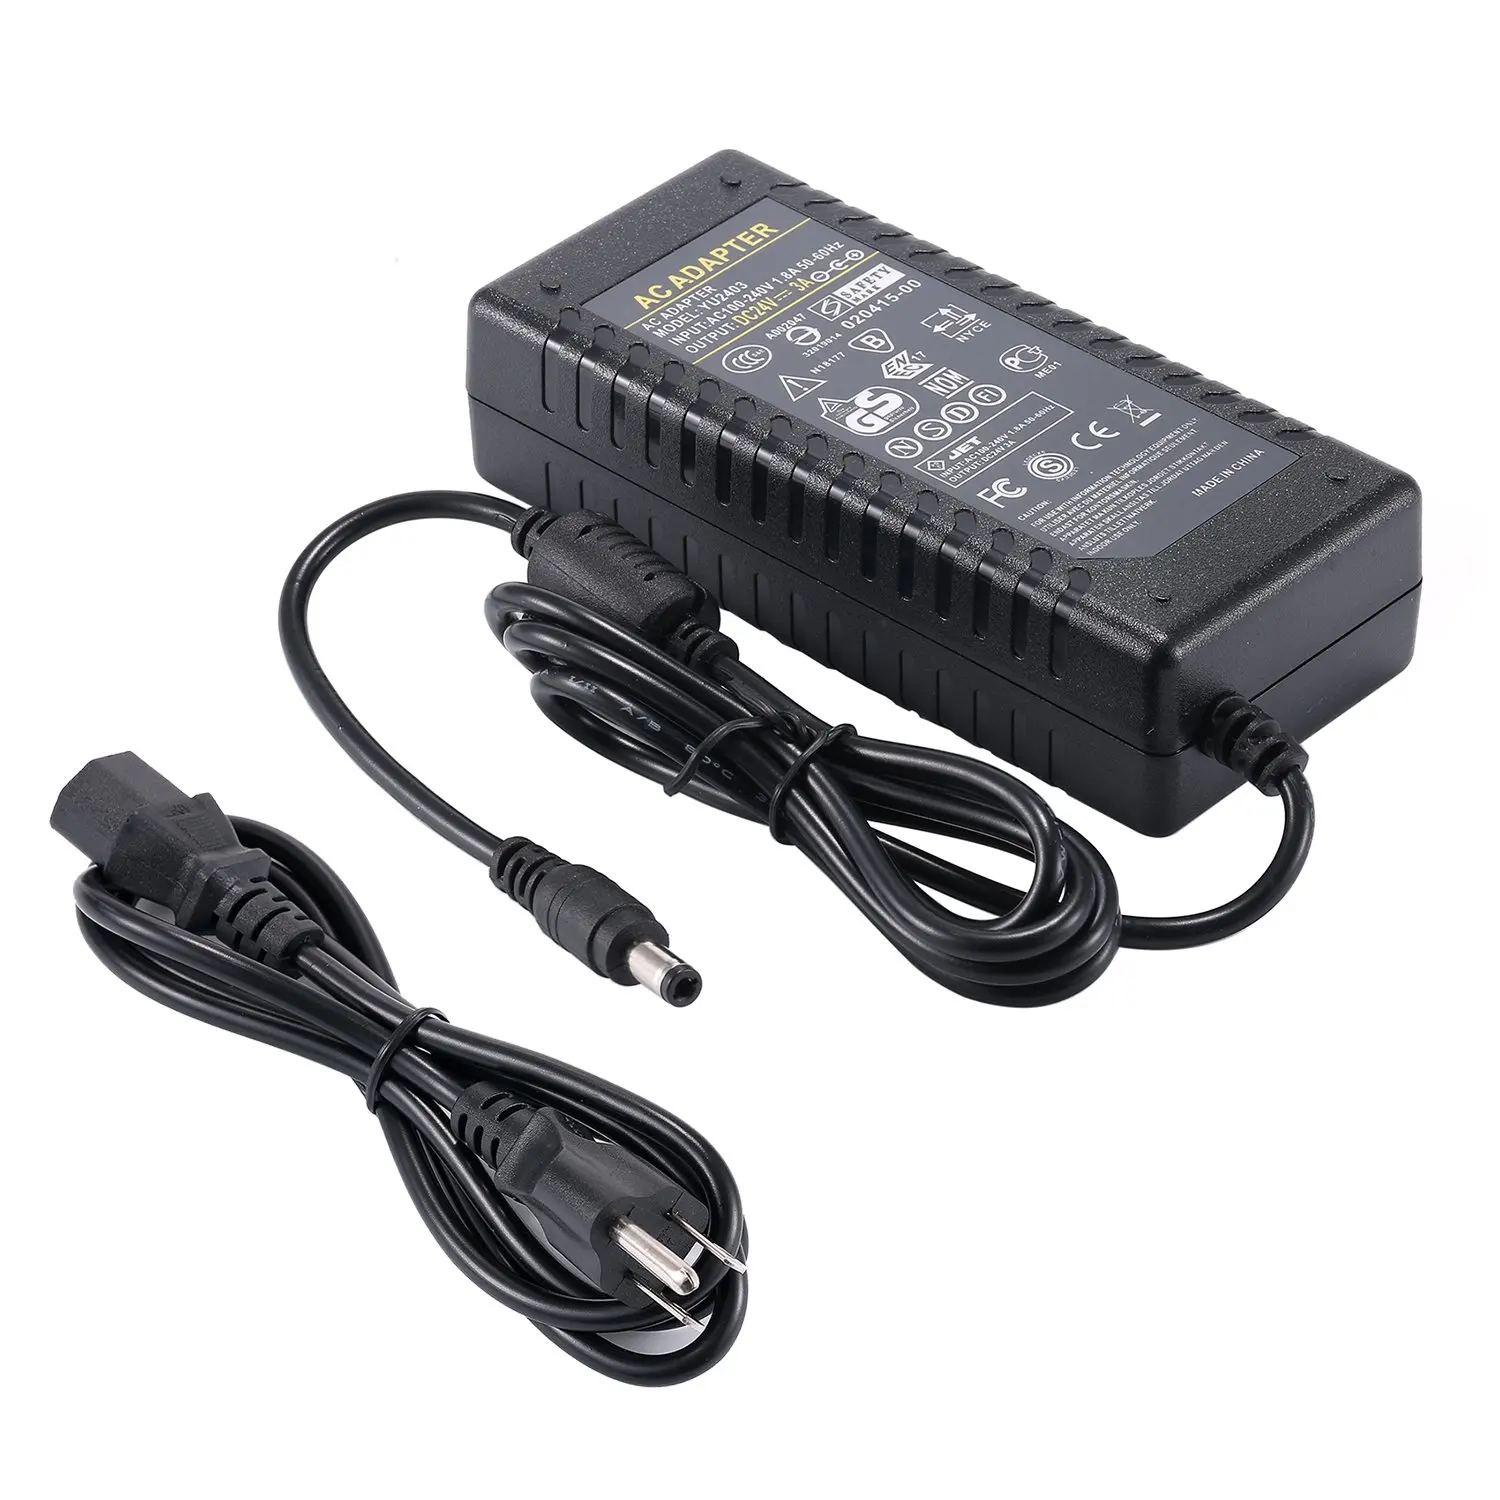 100-240V 50/60hz AC To DC 5V USB Power Adapter For Switching Manufacturers  and Suppliers China - Factory - Hang Tung Ltd